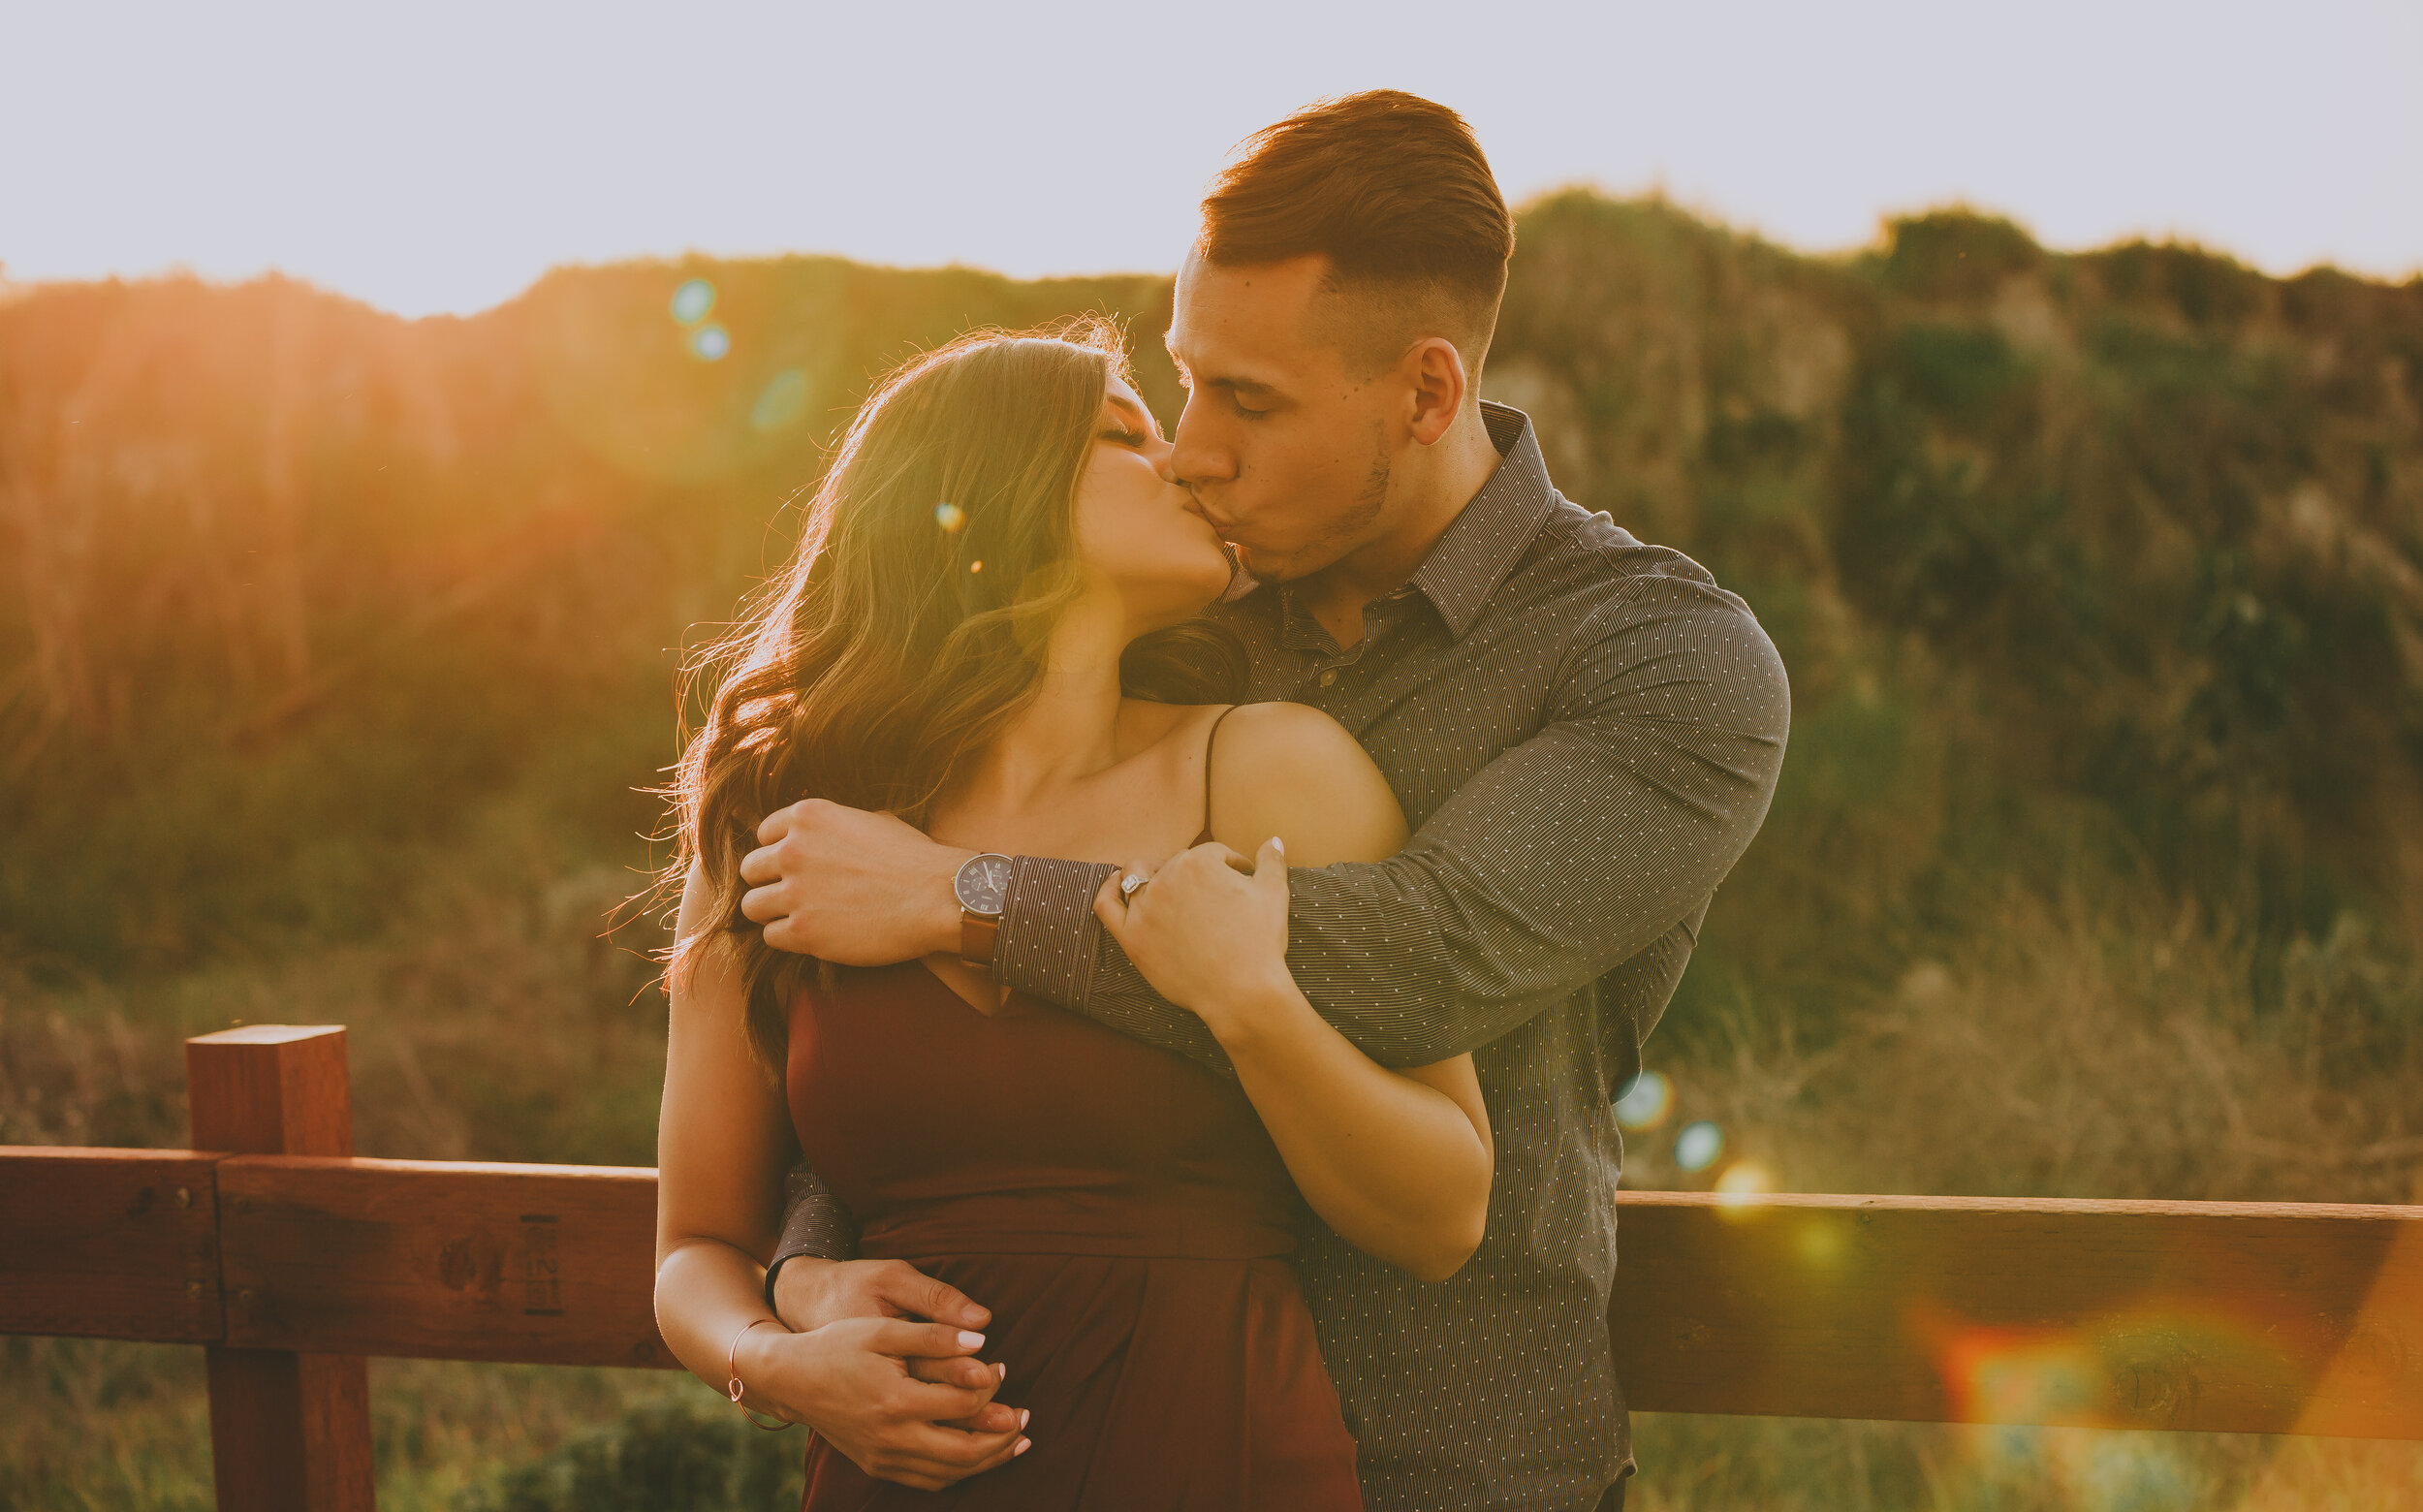 Fresno Engagament Photos - The Clausen Gallery - Samantha and Jesus-32.jpg